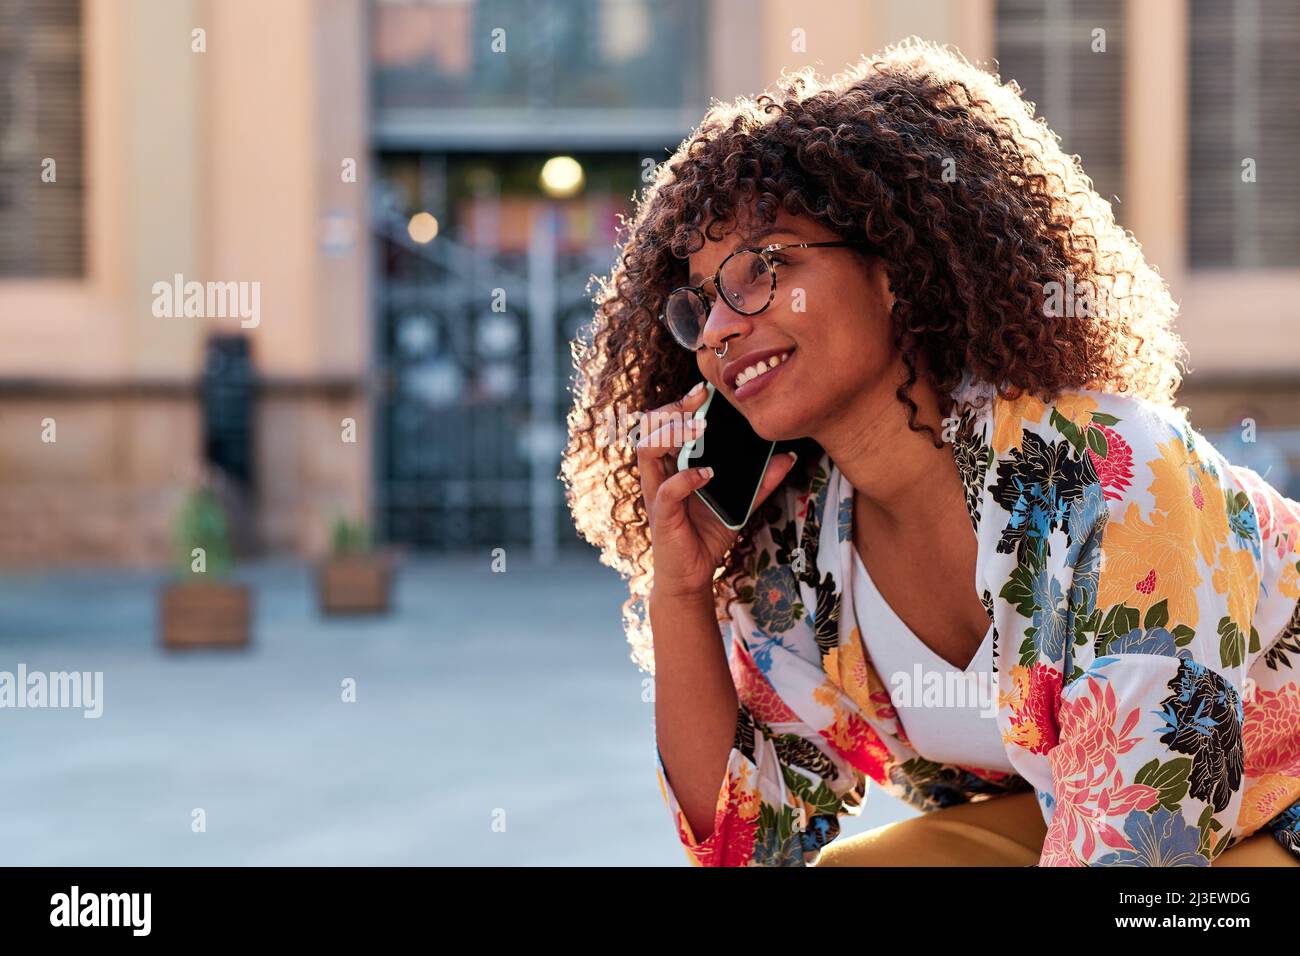 young afro american woman with curly hair using her mobile phone outdoors Stock Photo